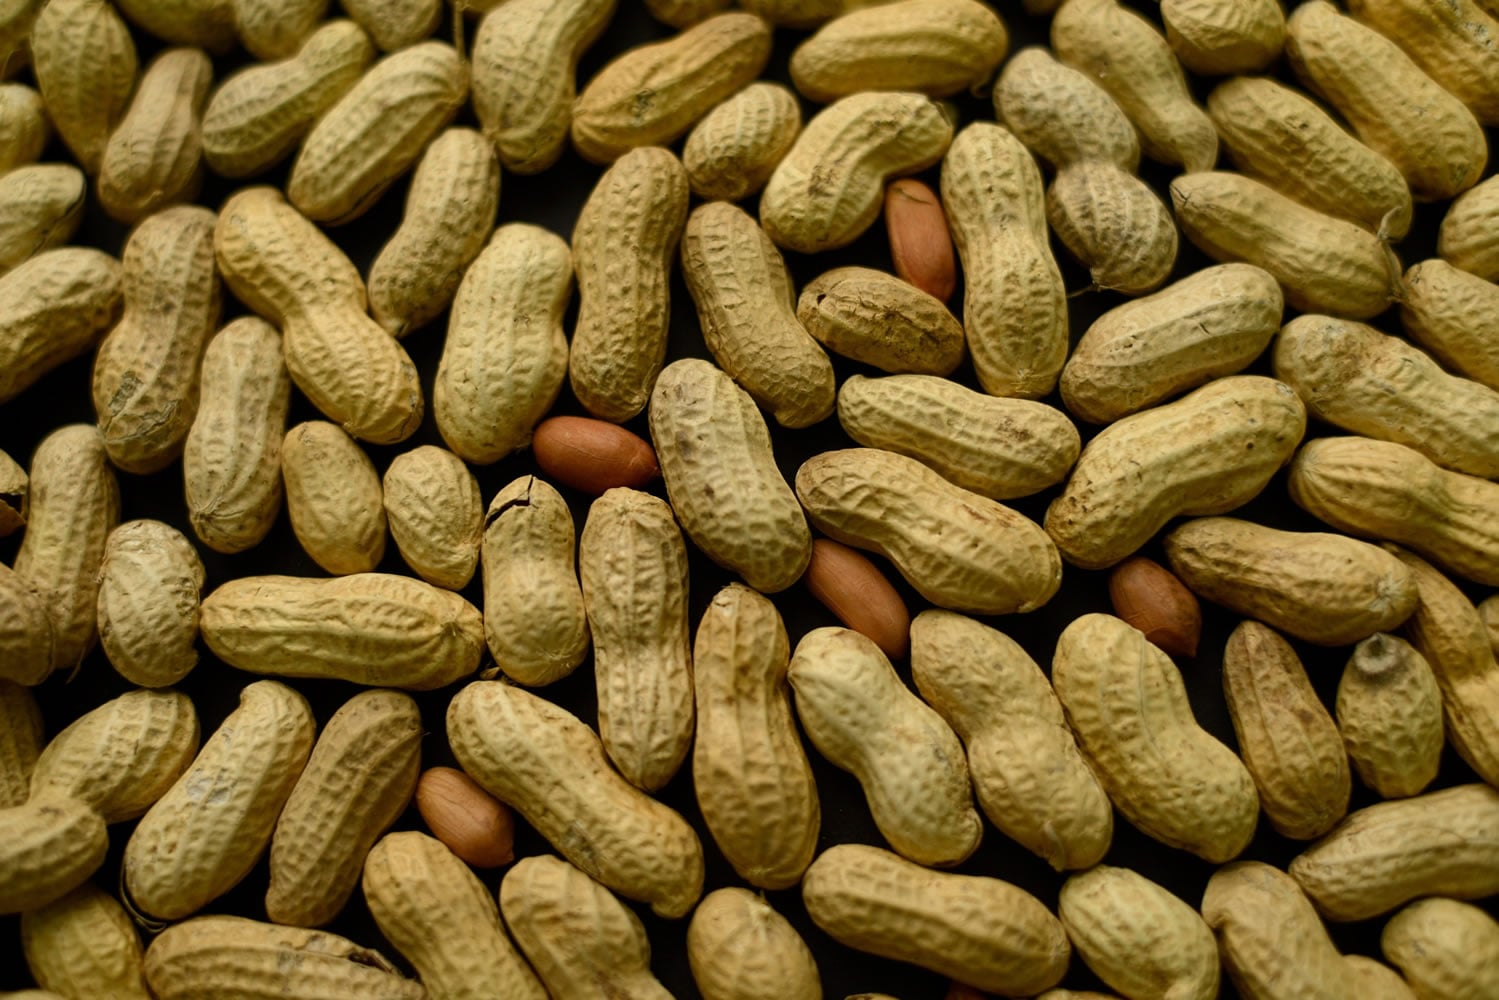 Two new studies bolster evidence that feeding babies peanuts or other allergy-inducing foods is more likely to protect them than to cause problems. One study, a follow-up to landmark research published last year, suggests that the early prevention strategy leads to persistent, long-lasting results in children at risk for food allergies. It found that allergy protection lasted at least through age 5 and didn&#039;t wane even when kids stopped eating peanut-containing foods for a year.